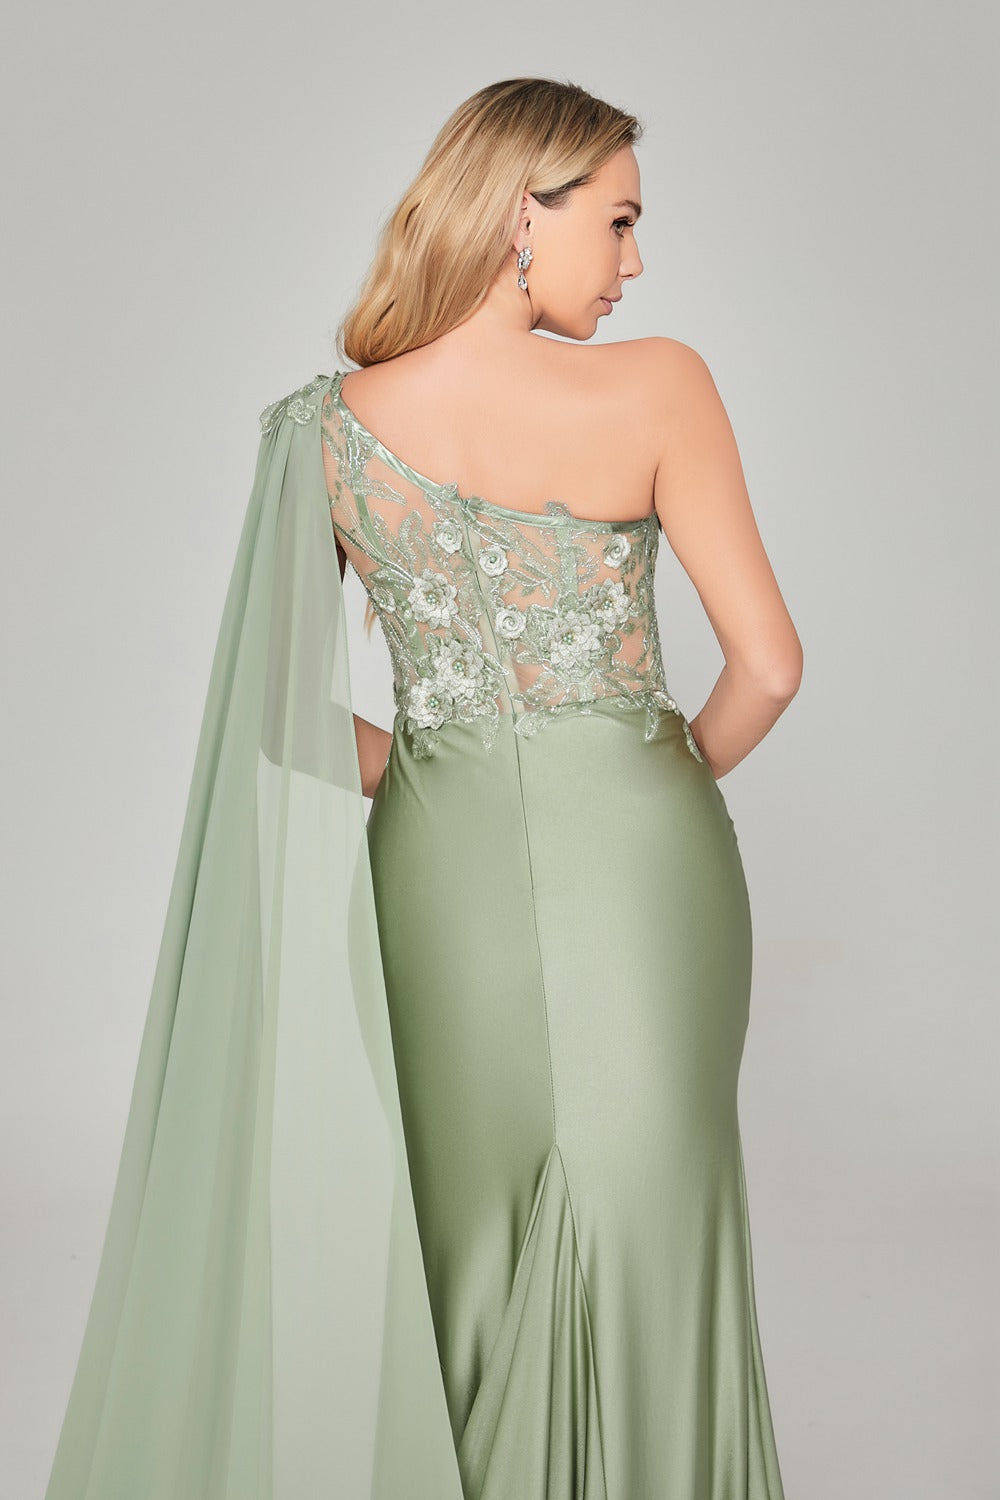 Enchanting Single-Shoulder Prom Dress with 3D Floral Accents 32890